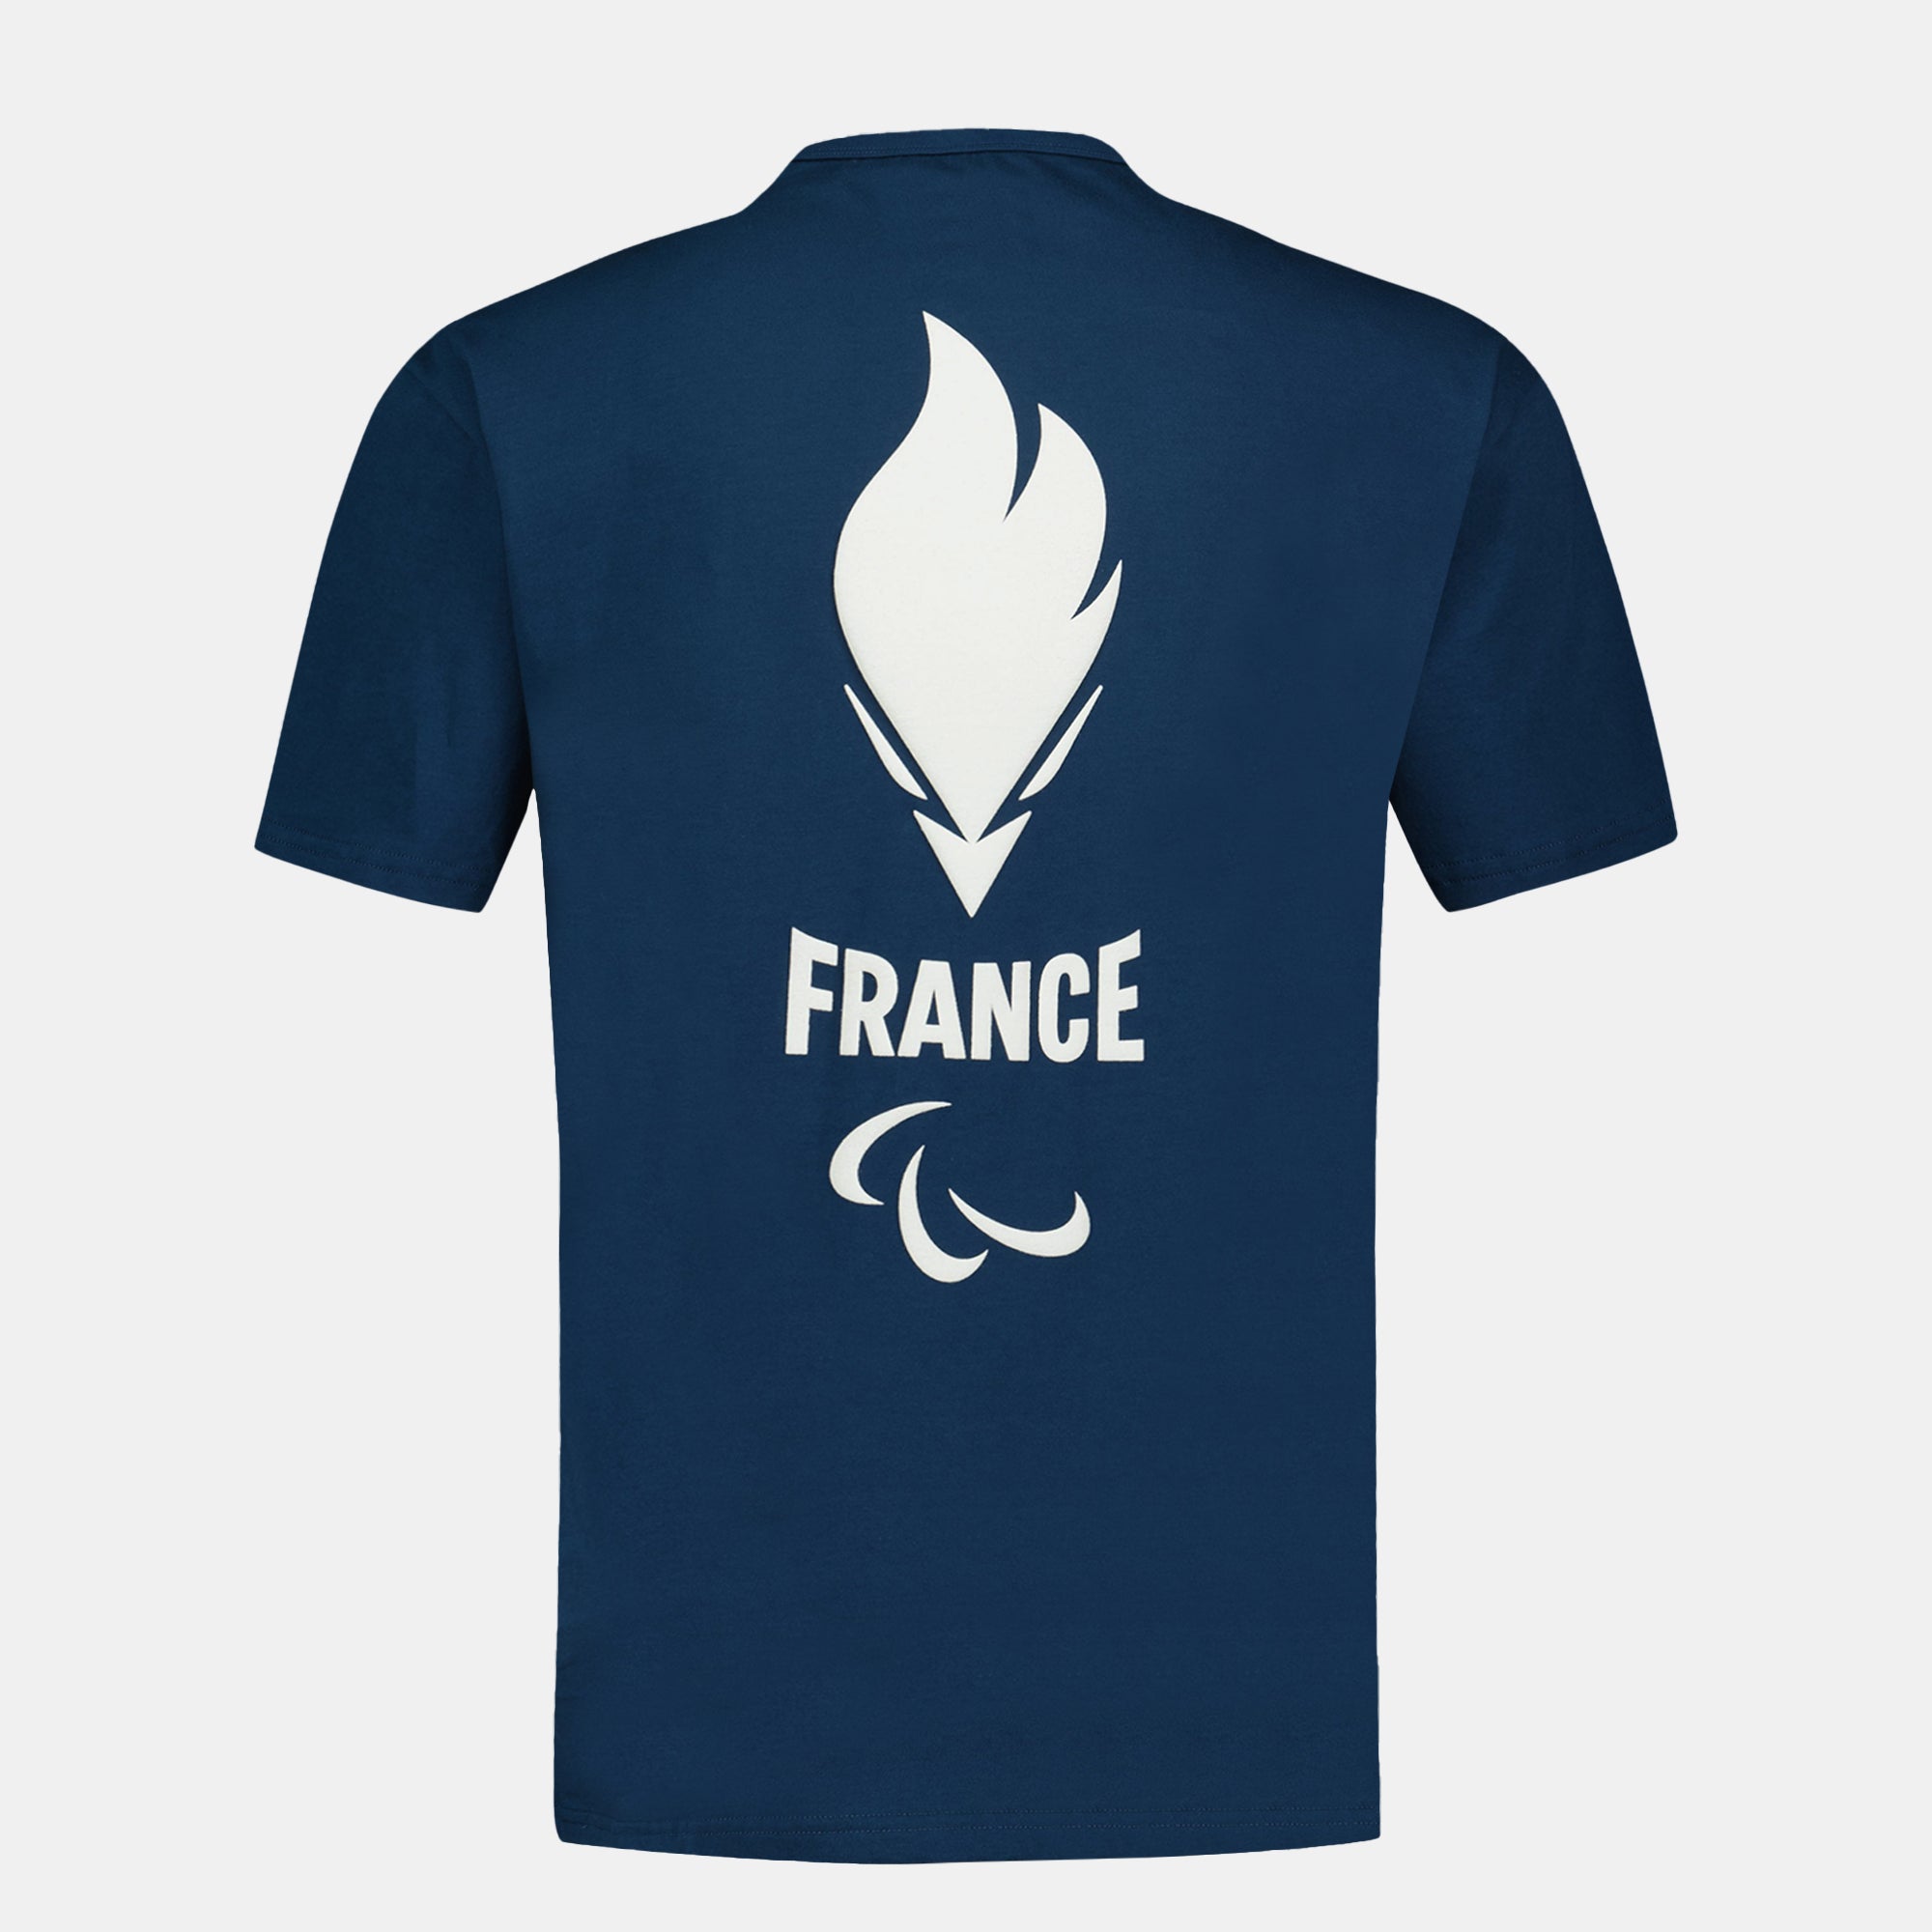 2421536-EFRP 24 Tee SS N°4 M insignia blue  | T-Shirt for men